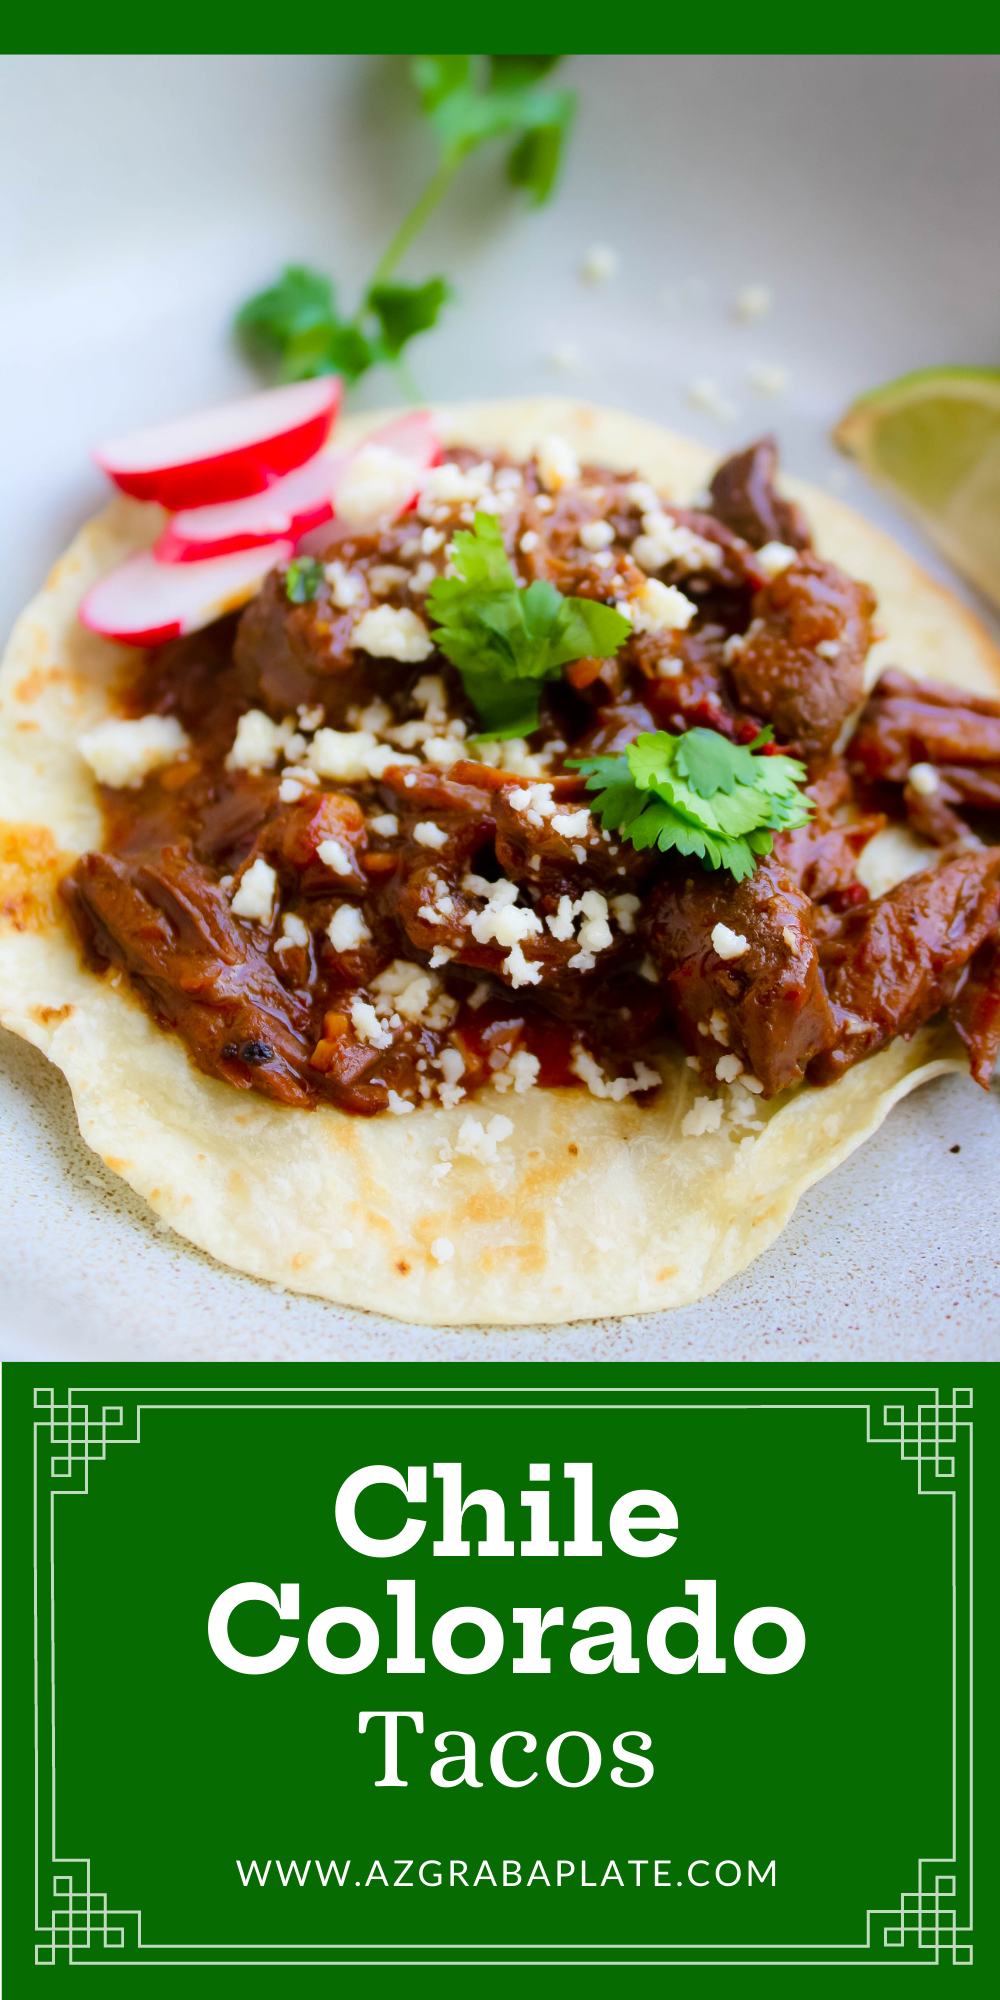 Chile Colorado Tacos are filling and a favorite for a fun meal. There's so much flavor in these Chile Colorado Tacos!